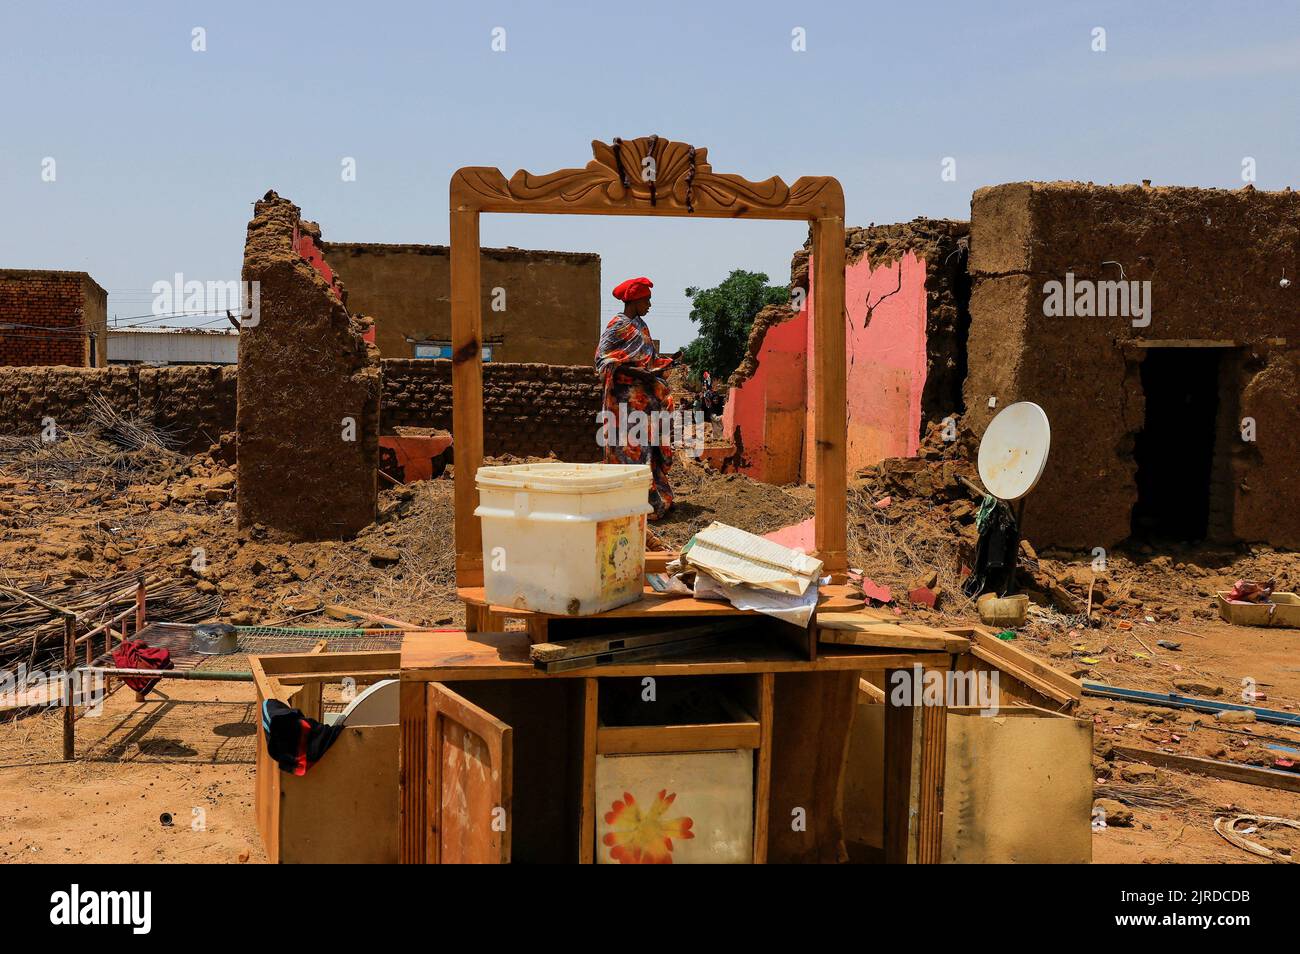 A woman collects her belongings after sustaining water damage to her house during floods in Al-Managil locality, in Jazeera State, Sudan August 23, 2022. REUTERS/Mohamed Nureldin Abdallah Stock Photo